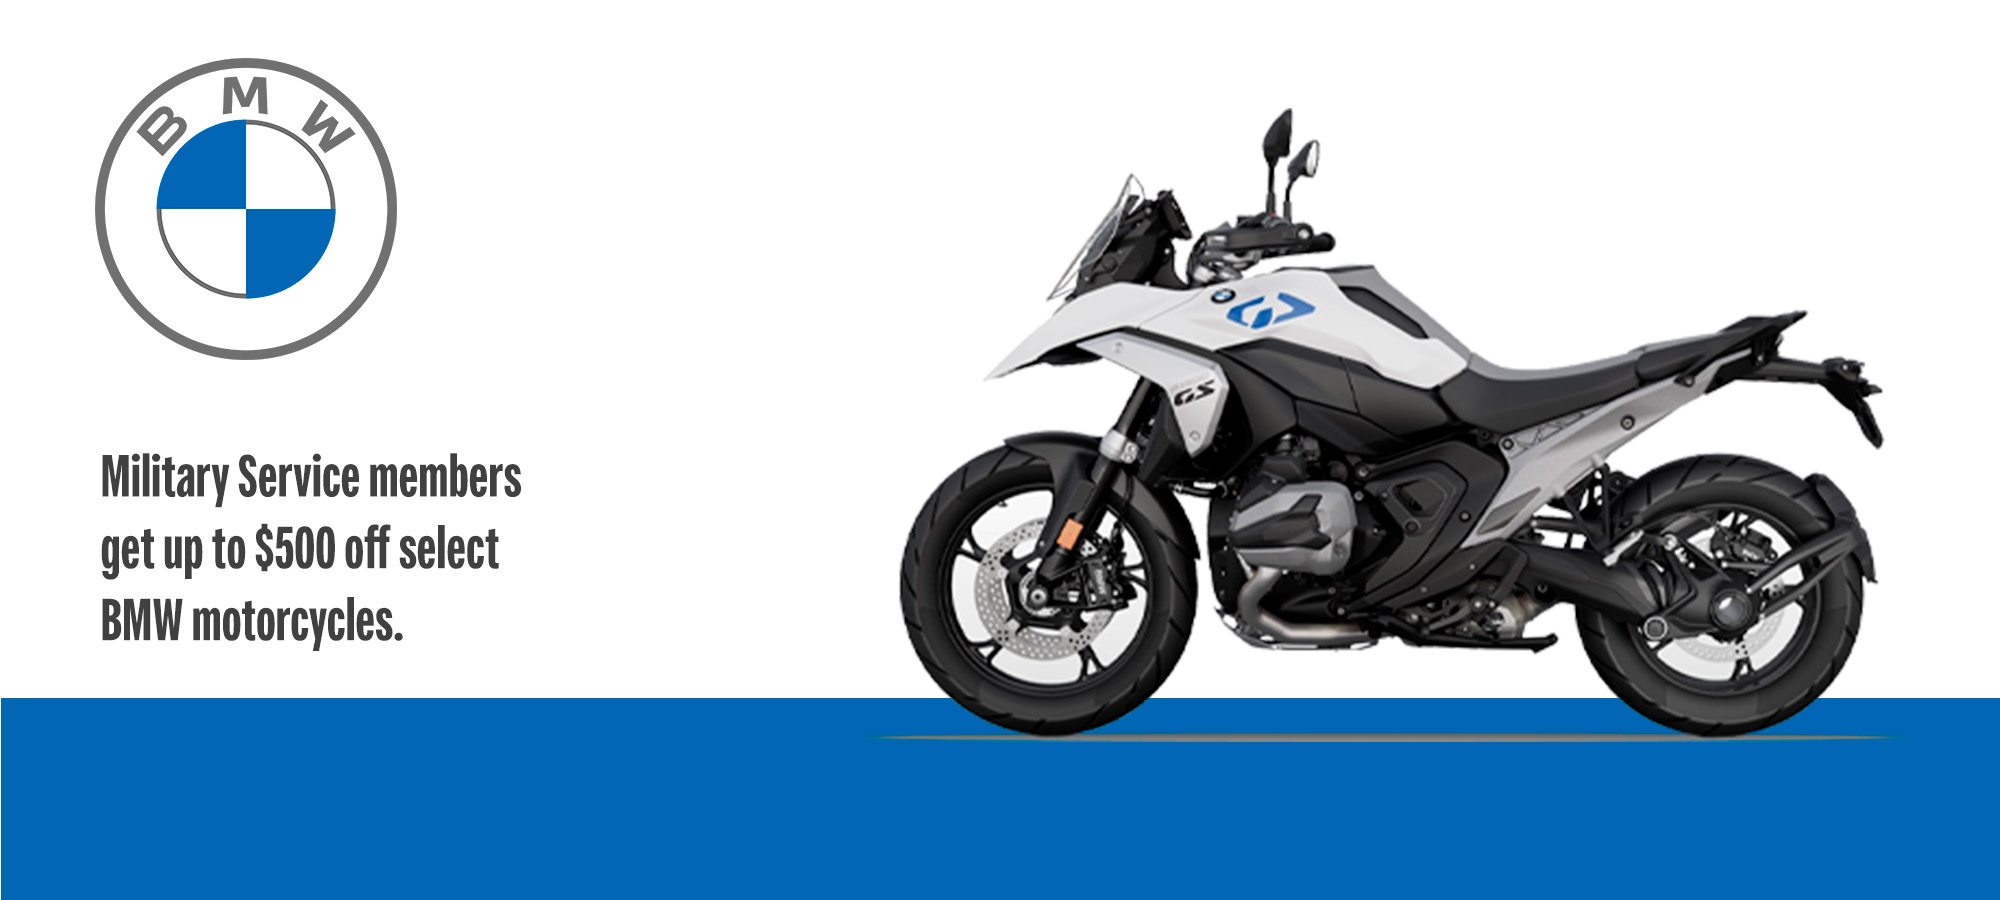 BMW US - Military Service members get up to $500 off select BMW motorcycles. at Wild West Motoplex